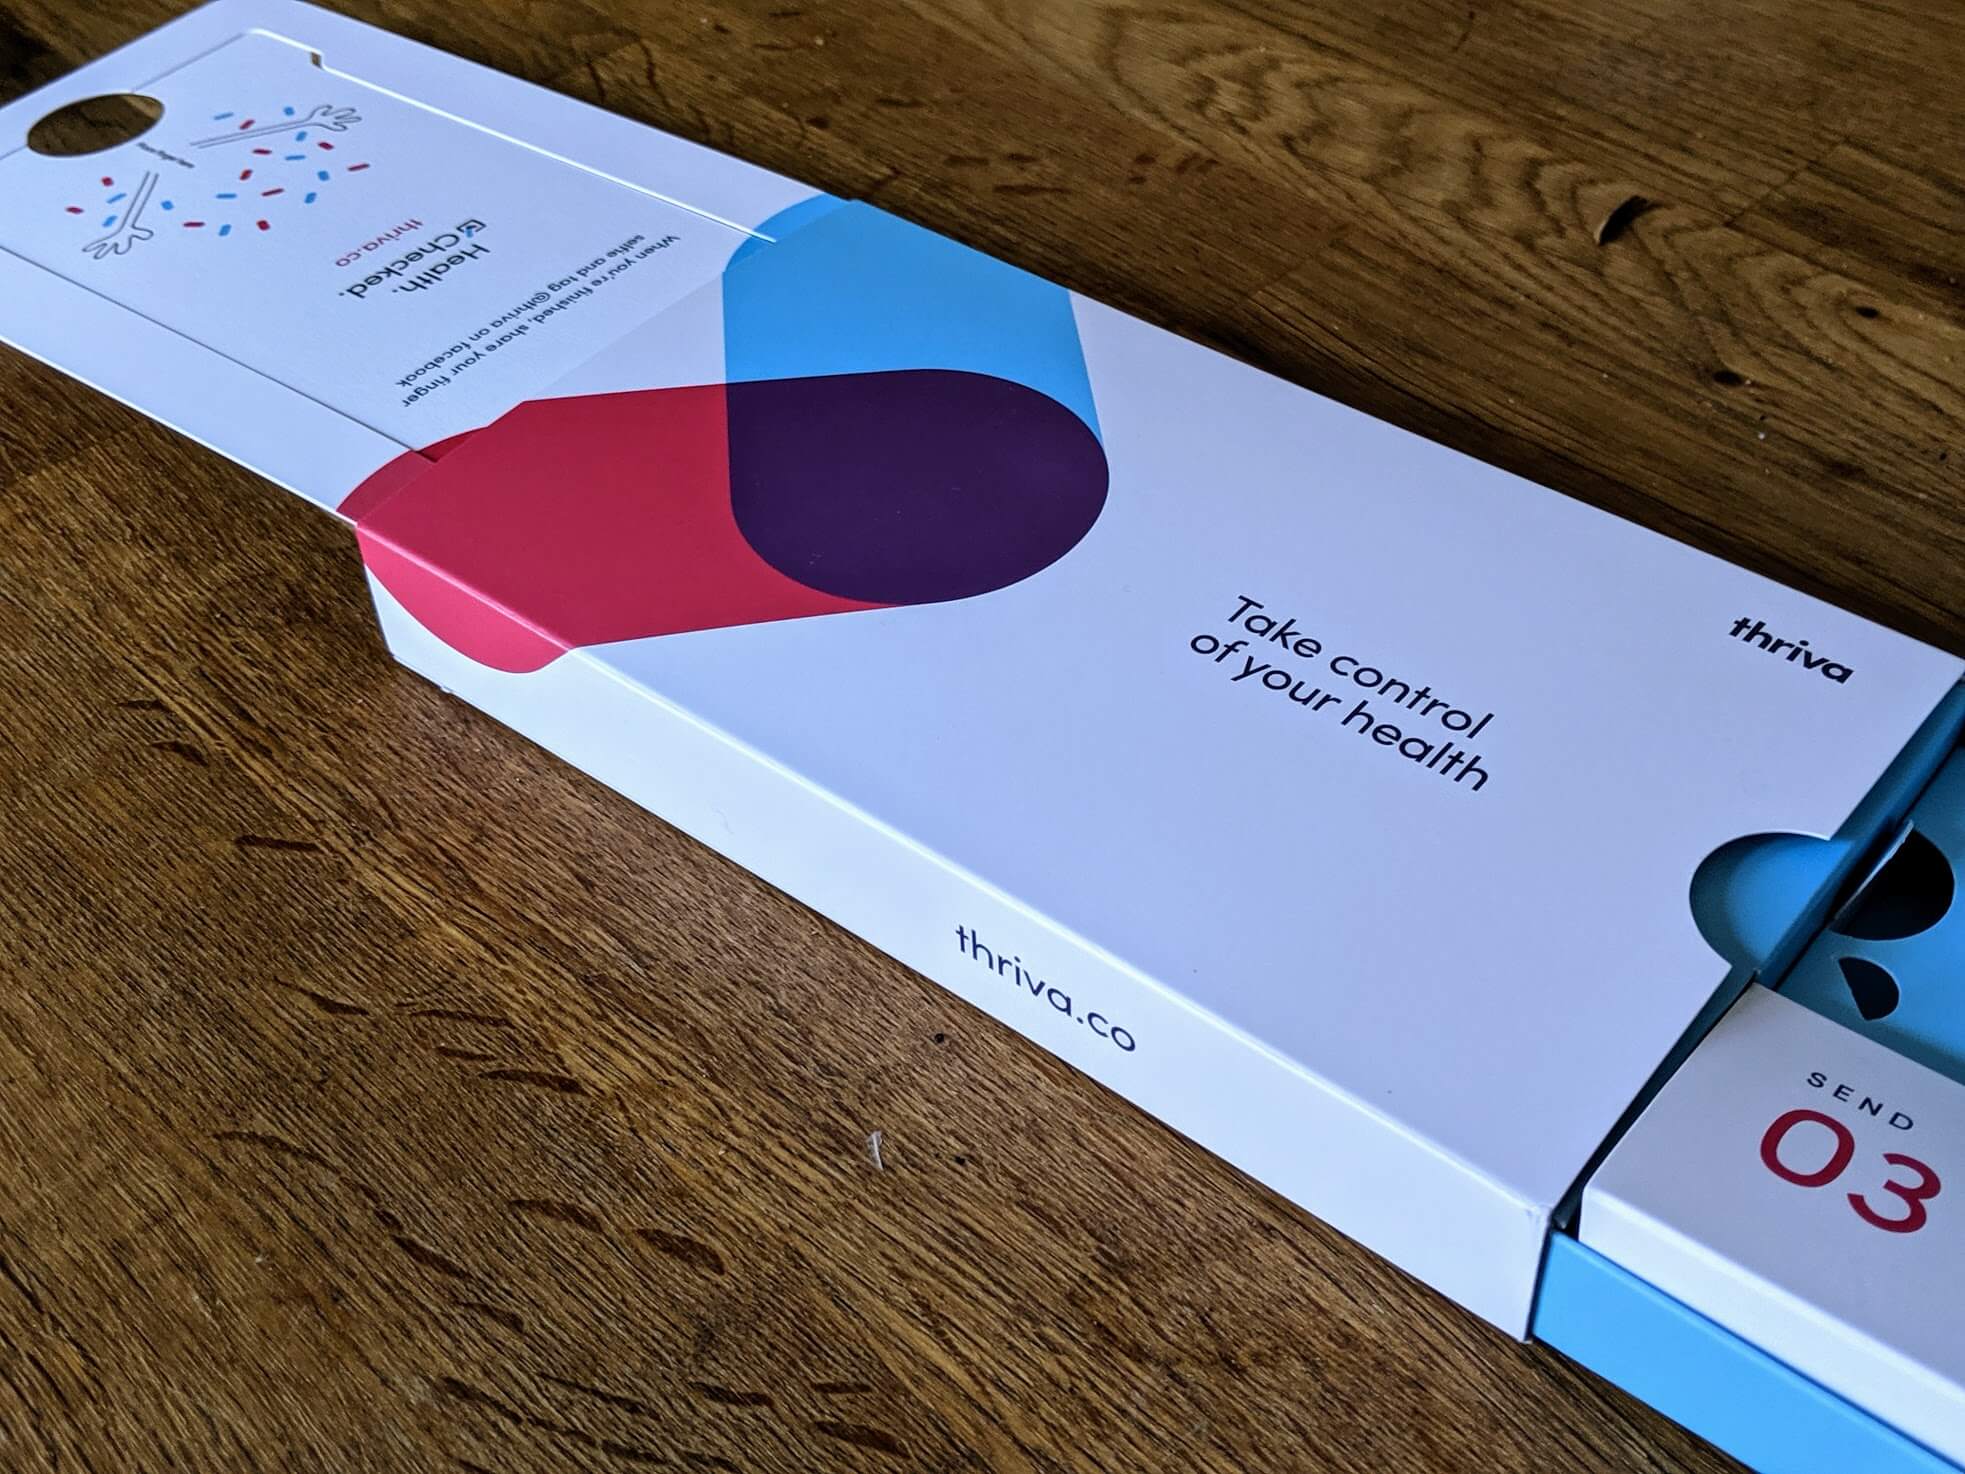 The letterbox-sized Thriva kit